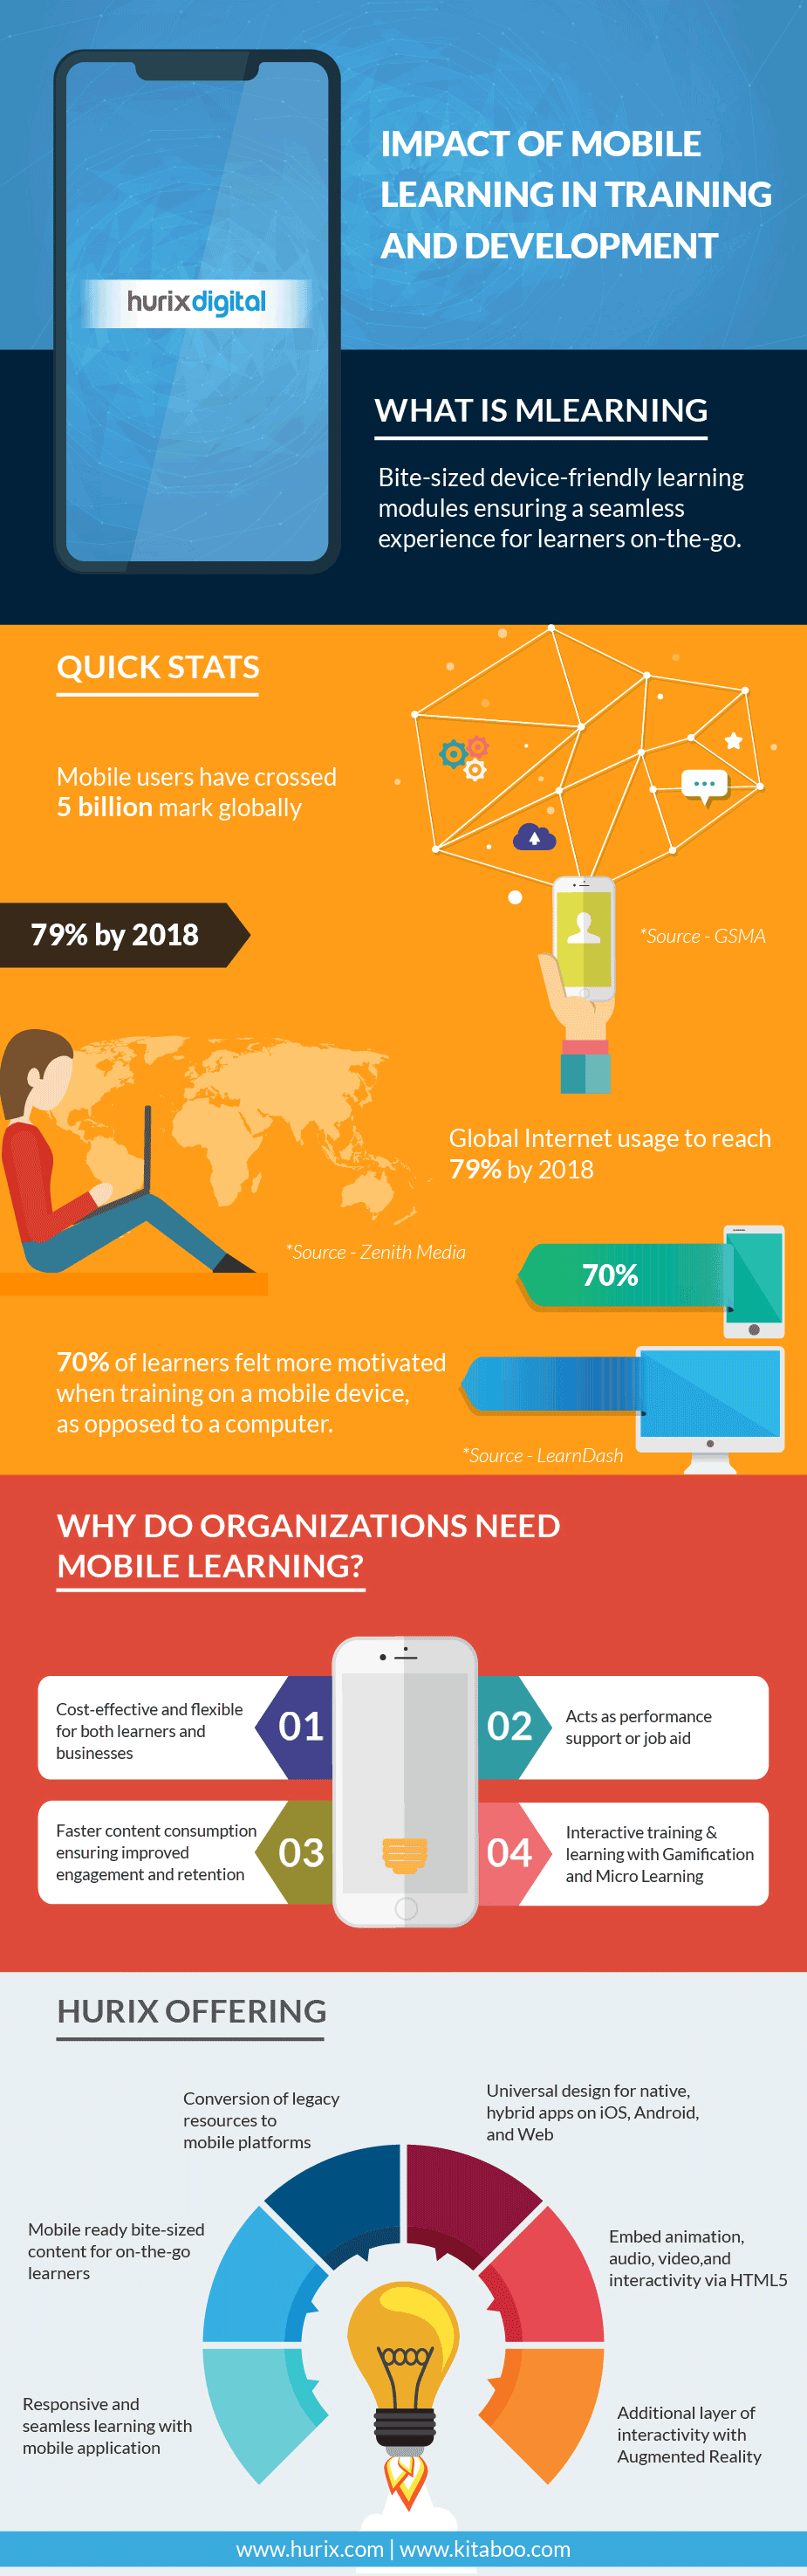 Gif+ info graphic - Impact of Mobile Learning in Training & Development Infographic